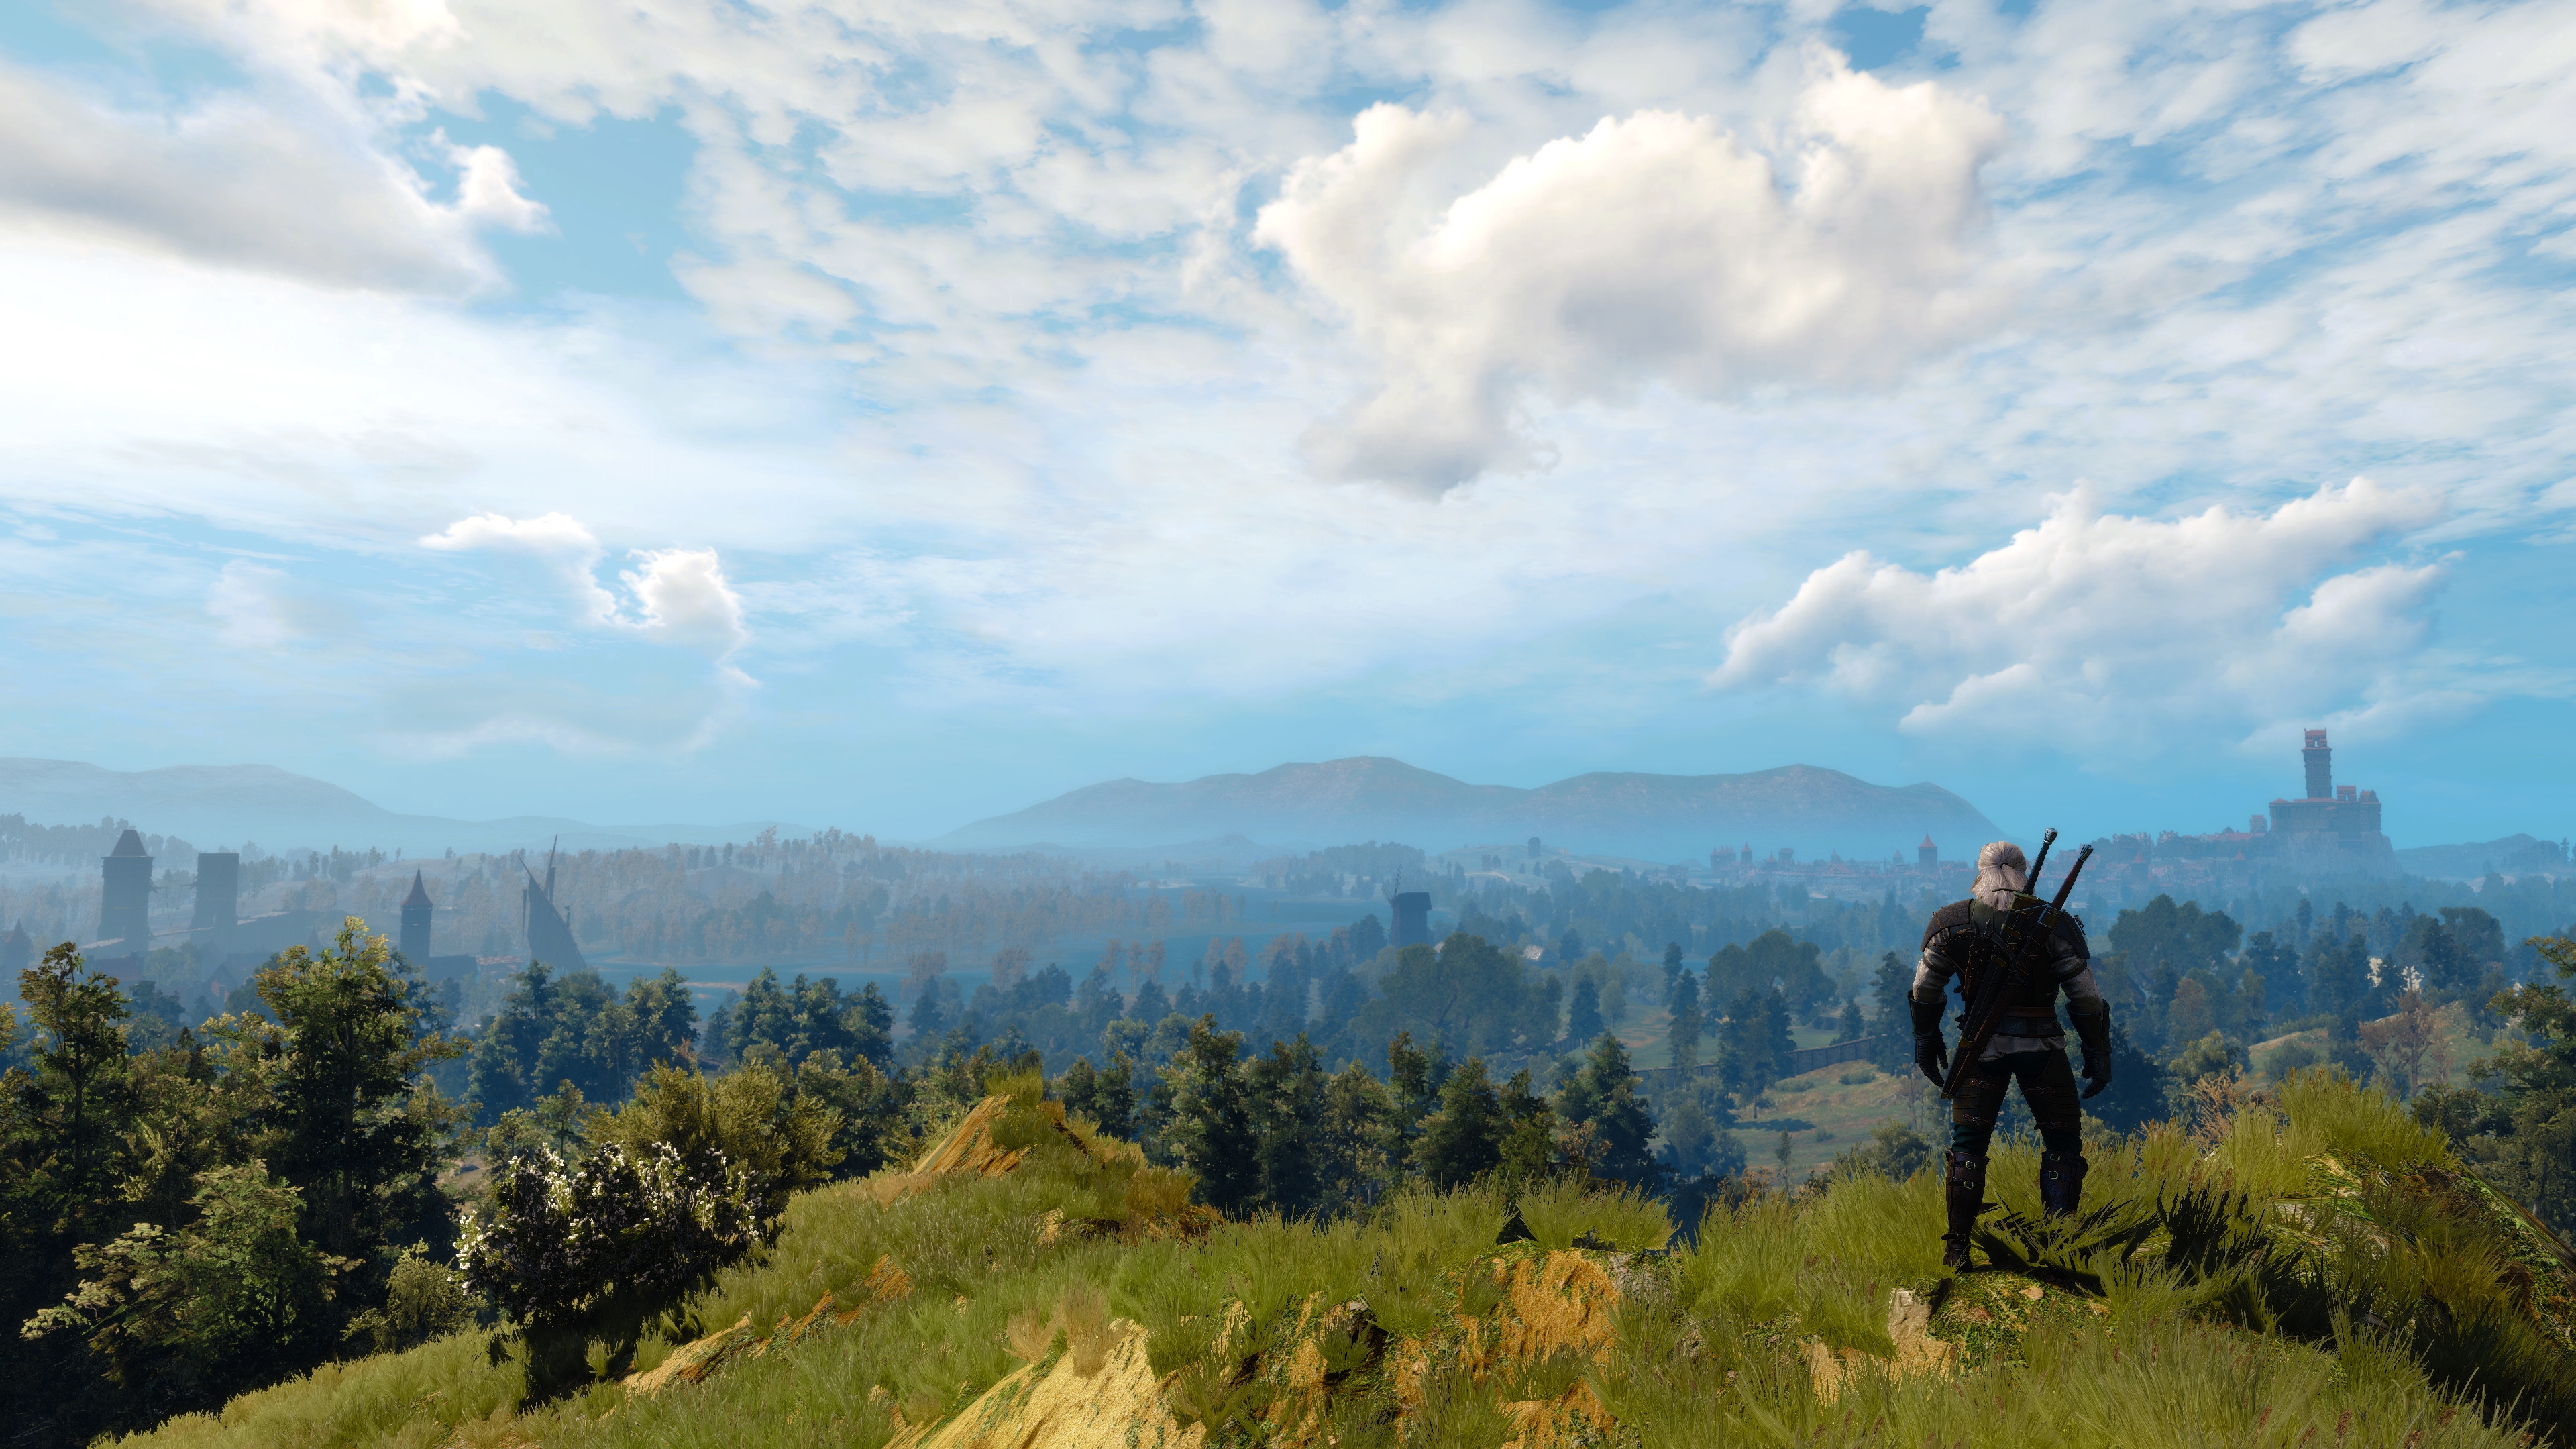 General 3840x2160 The Witcher 3: Wild Hunt screen shot Geralt of Rivia video game art clouds video games nature video game characters CGI video game men standing sword men with swords landscape white hair trees sky grass